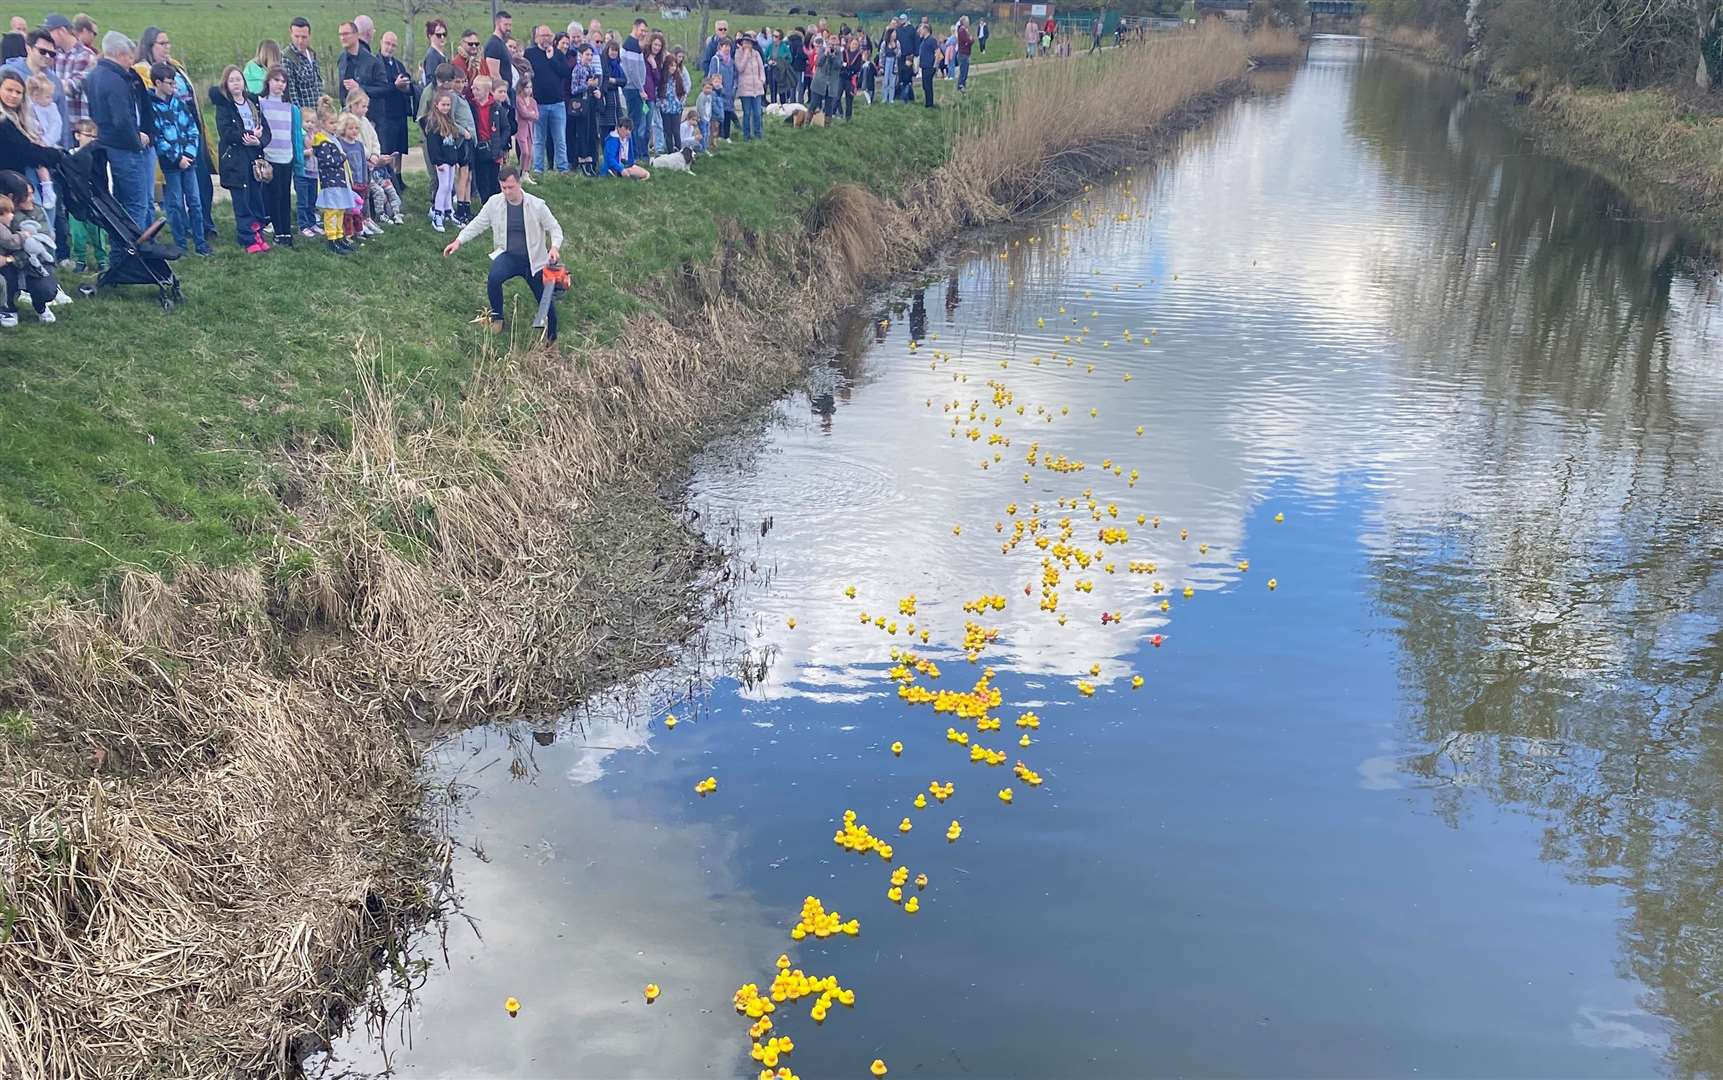 The annual duck race returns to the canal near the Woolpack Inn on Good Friday. Picture: Saltwick Media